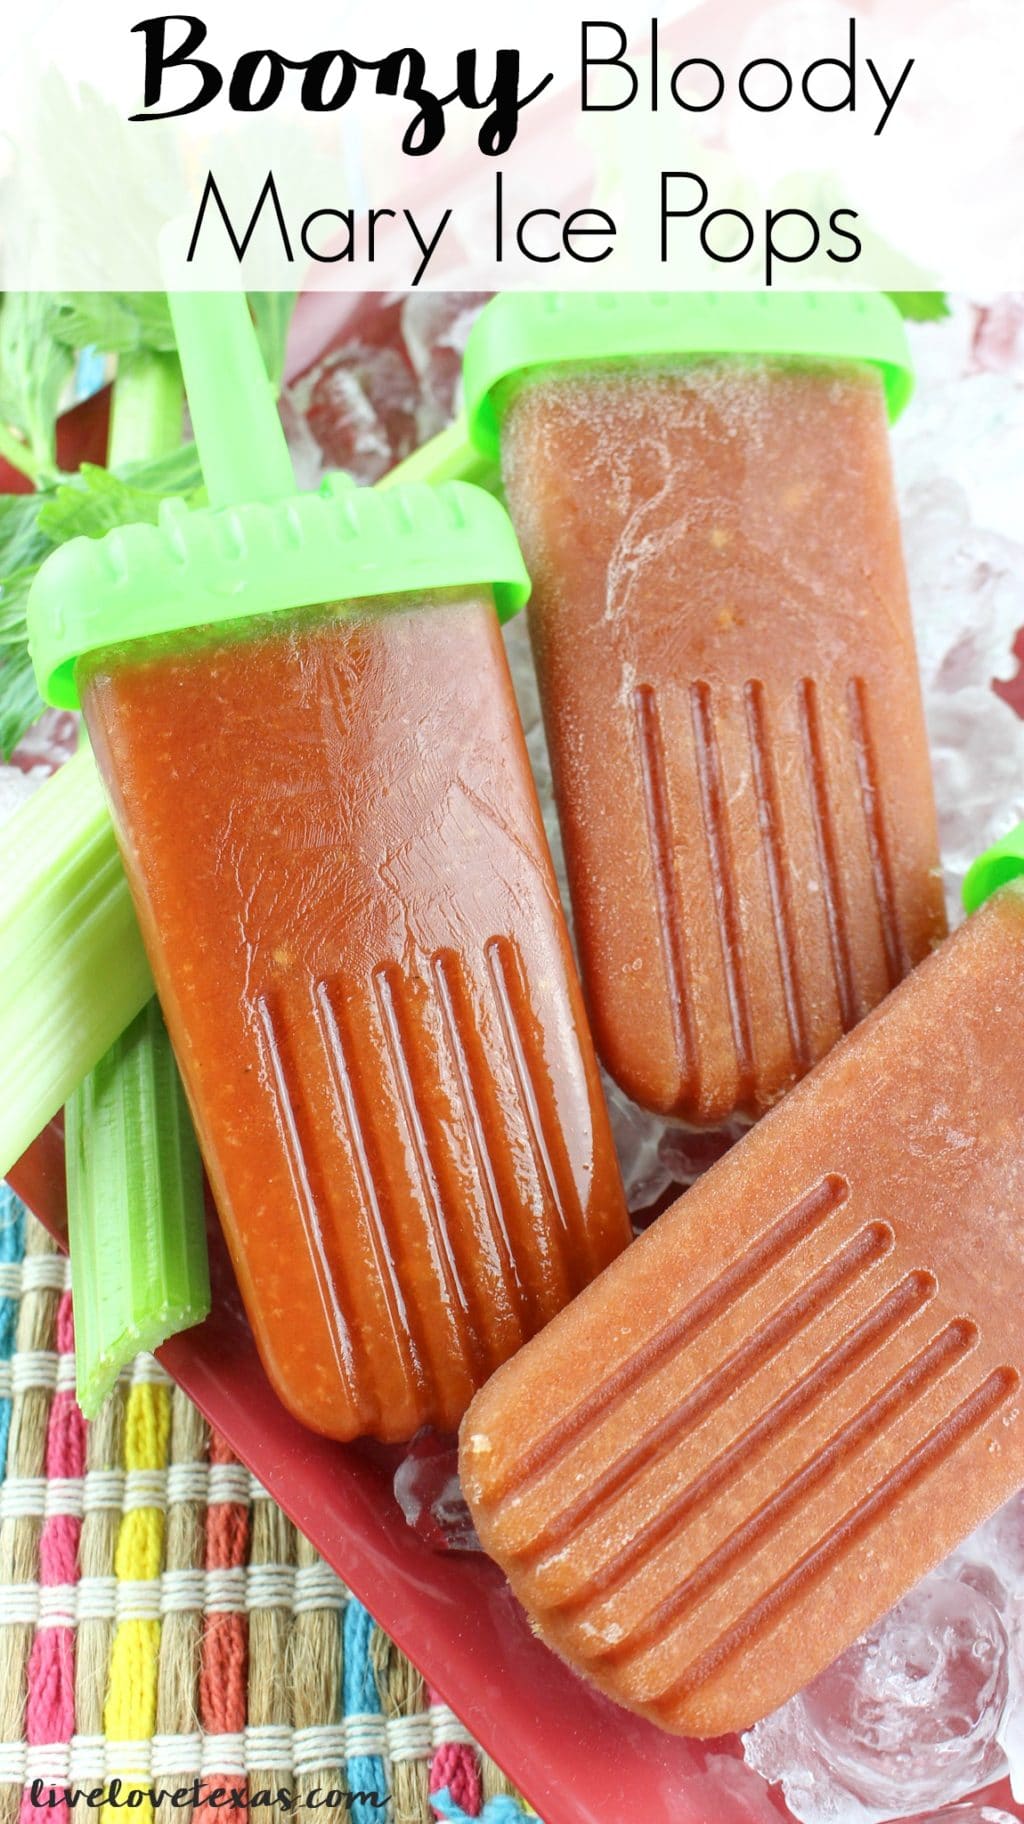 Get nostalgic for the homemade ice pops from your childhood with an adult twist! Try this cold and refreshing Boozy Bloody Mary Ice Pops recipe.